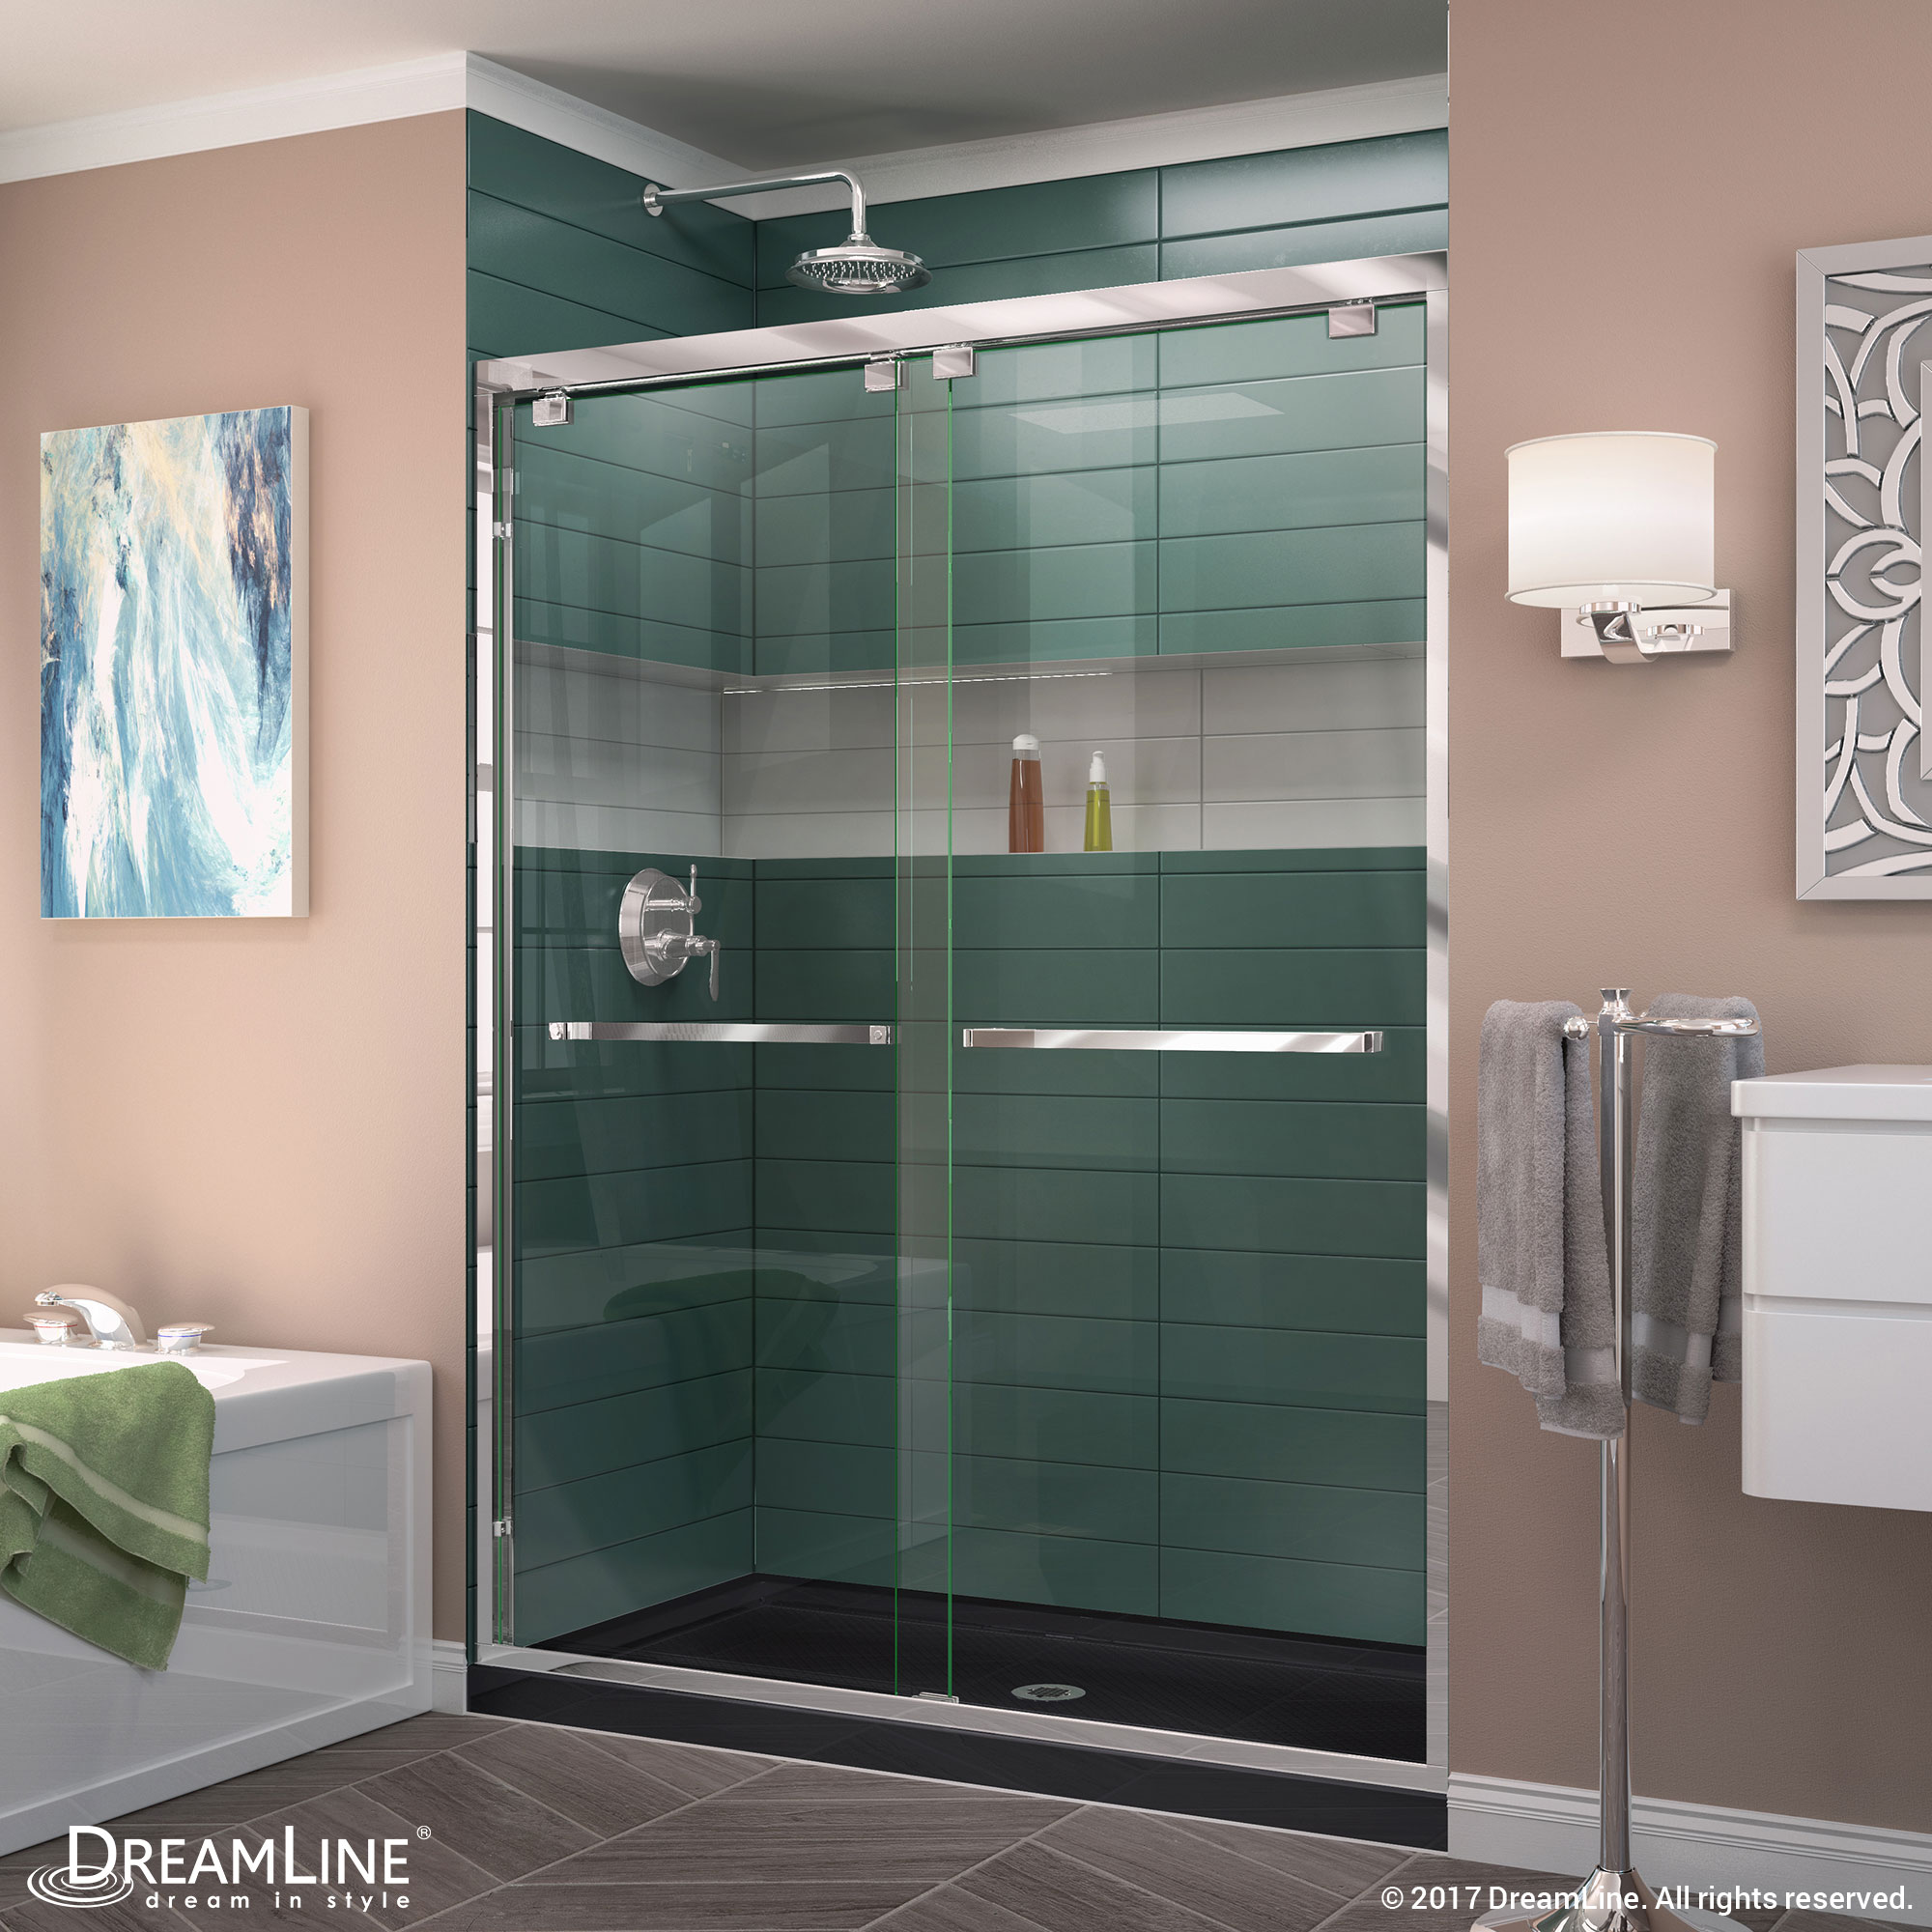 DreamLine Encore 32 in. D x 48 in. W x 78 3/4 in. H Bypass Shower Door in Chrome and Center Drain Biscuit Base Kit